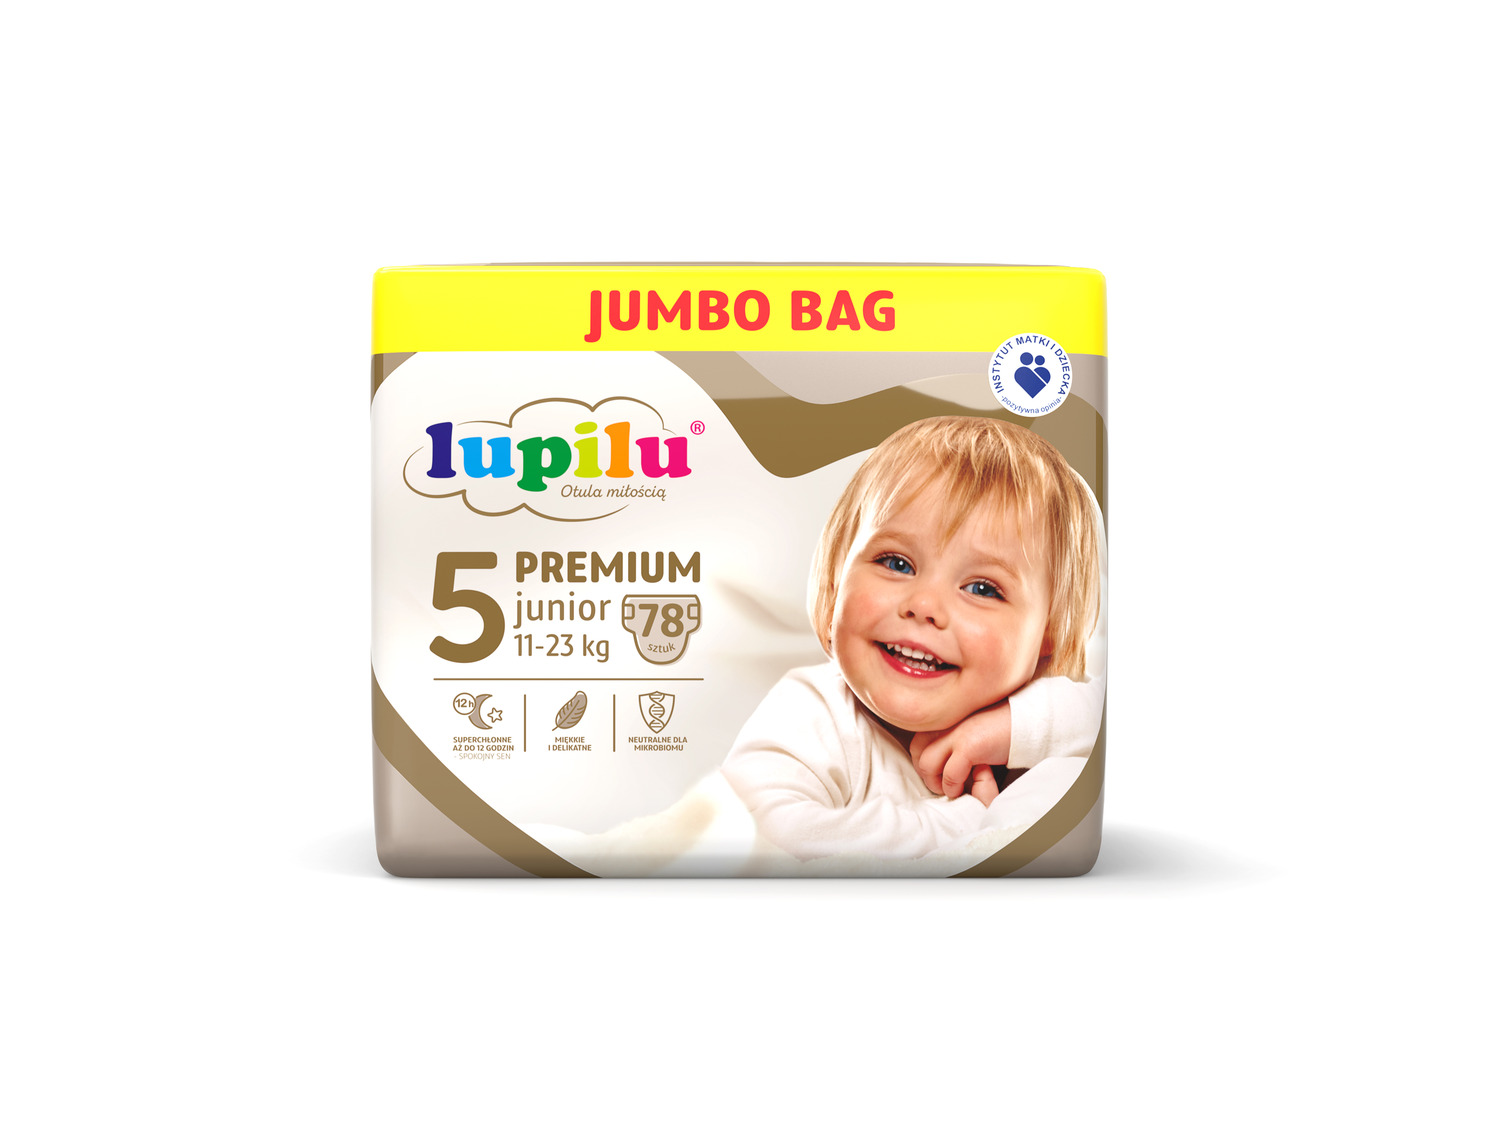 pampers active baby dry promocja